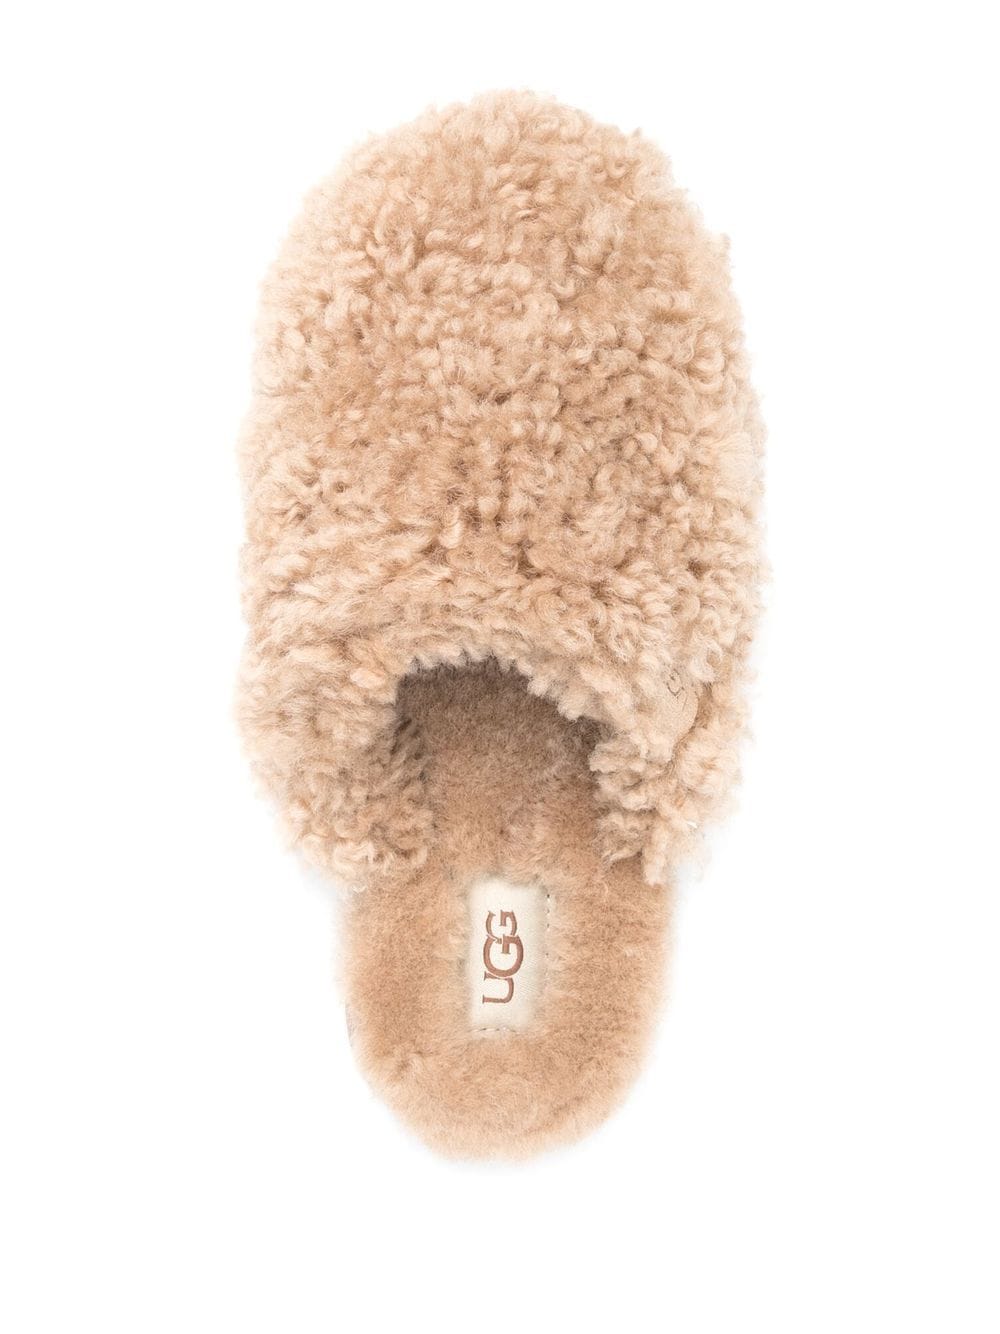 UGG: Maxi curly slide in sand colour. Sold by My o My in Helsinki.